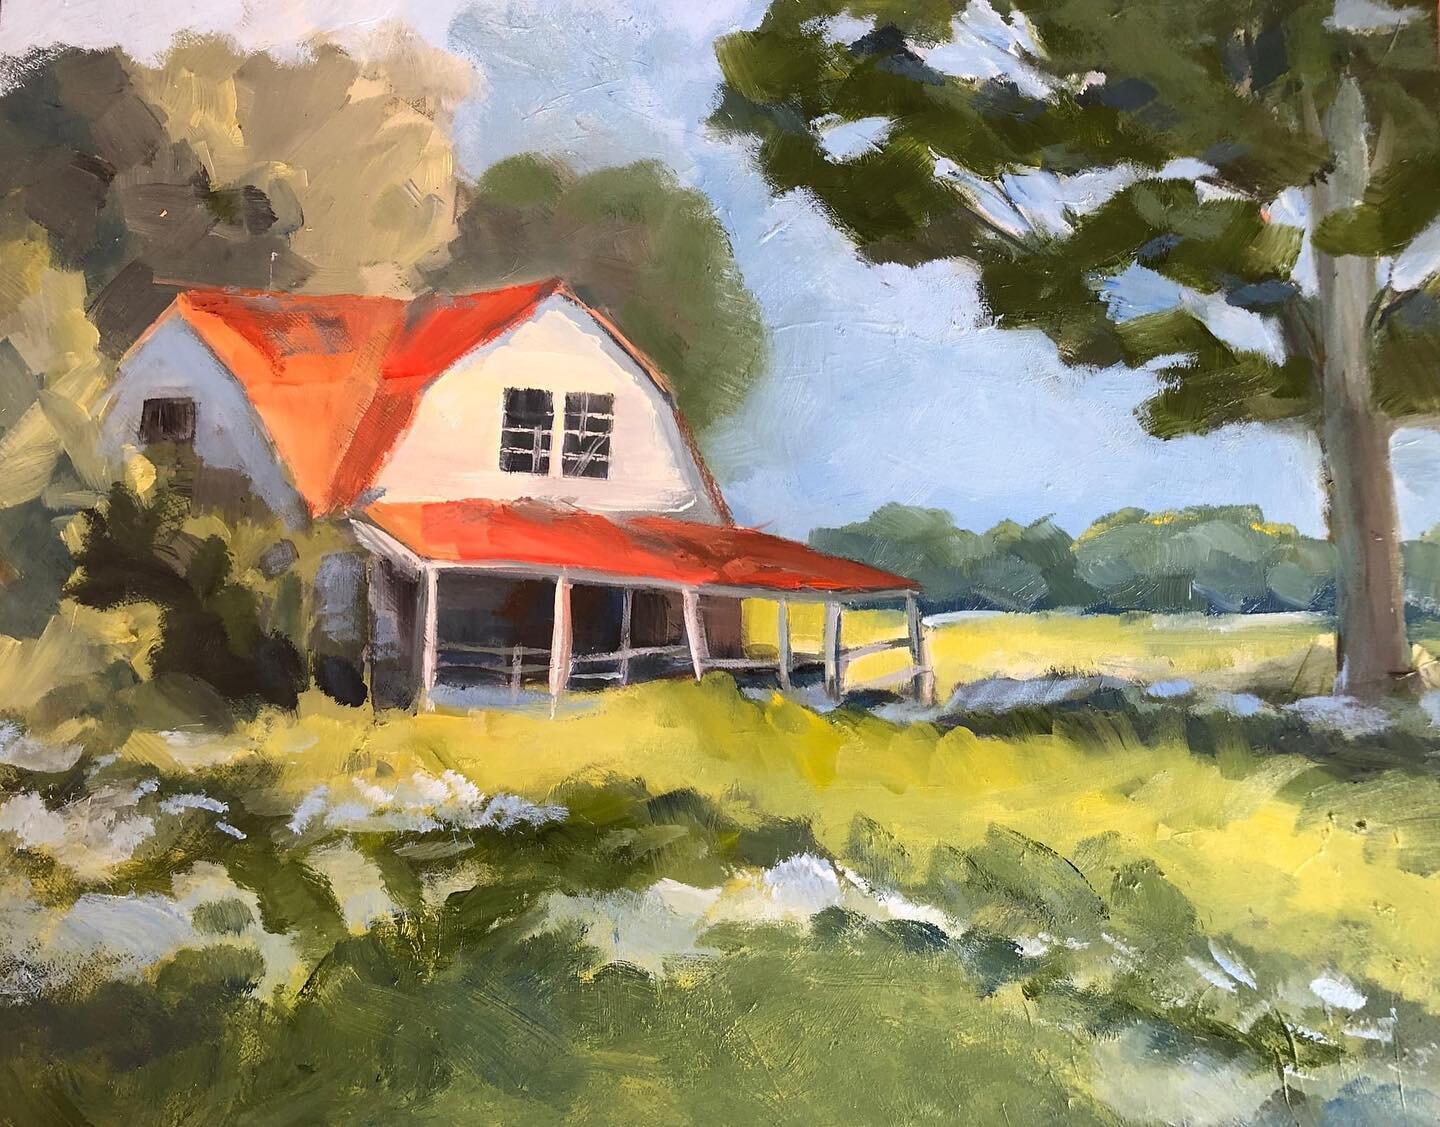 We're happy to welcome painter Jim Babinchak to our Plein Air Abingdon Festival.  If you're not signing up to paint, then make plans now to attend the popup galleries each night so you can have first dibs on purchasing beautiful works of art created 